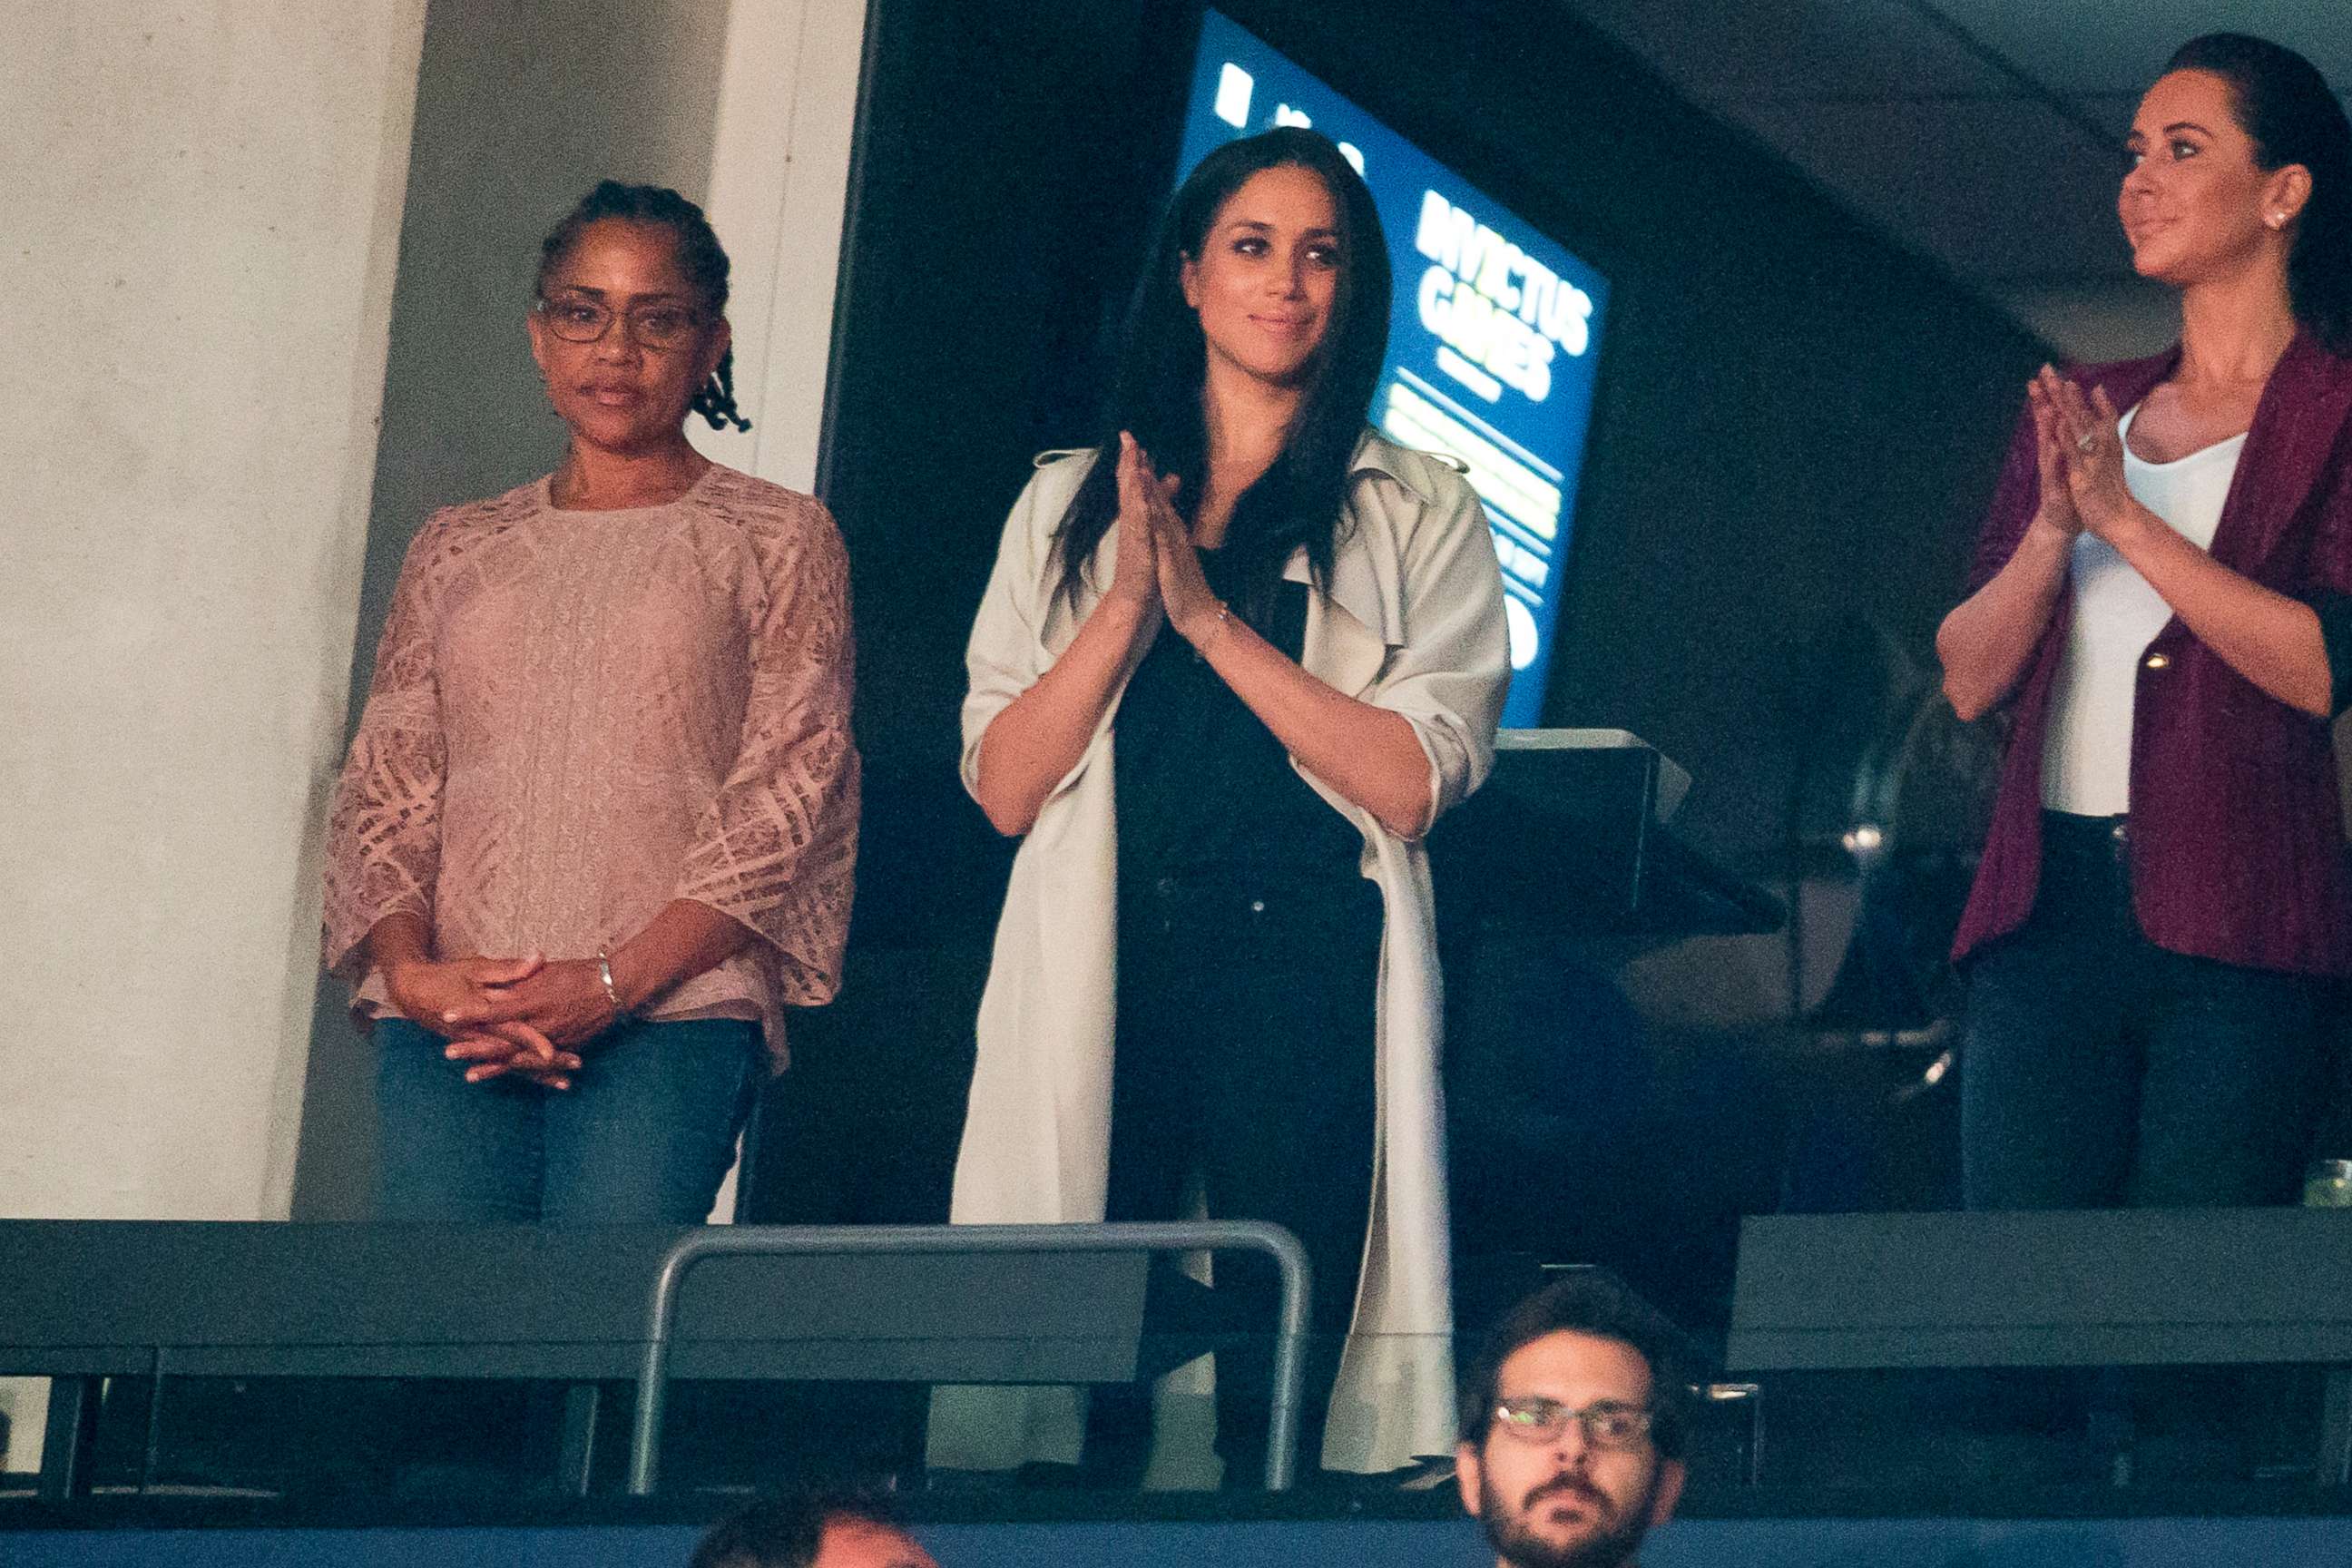 PHOTO: Meghan Markle and her mother Doria Ragland watch the closing ceremonies for the Invictus Games in Toronto, Canada, Sept. 30, 2017.